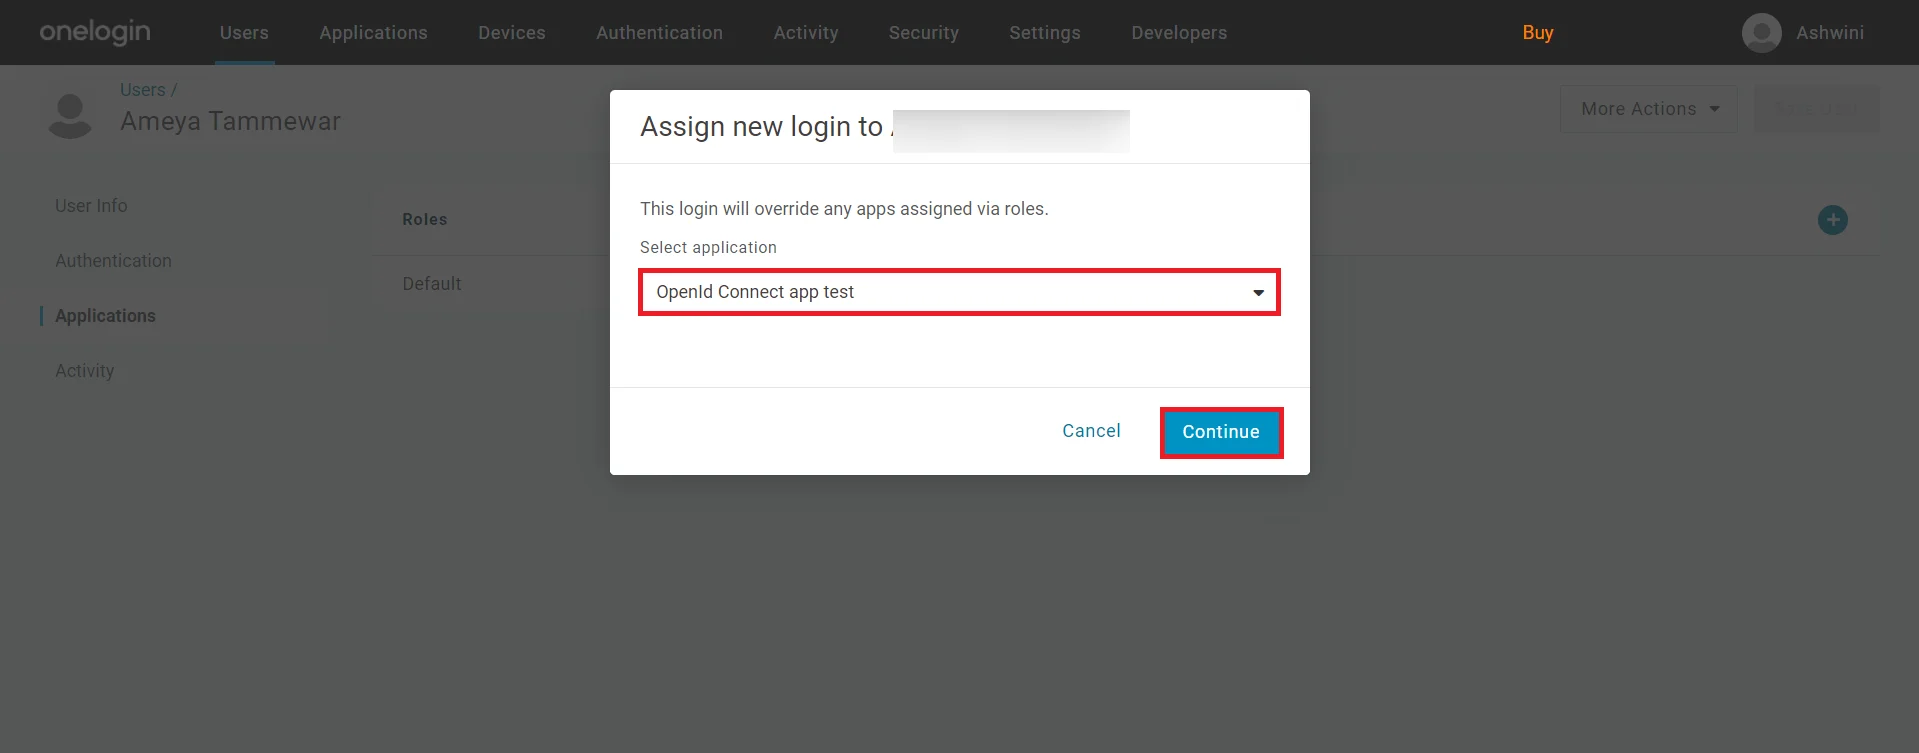 Secure Access with OneLogin Single Sign-On (SSO) - Enter-redirecturl